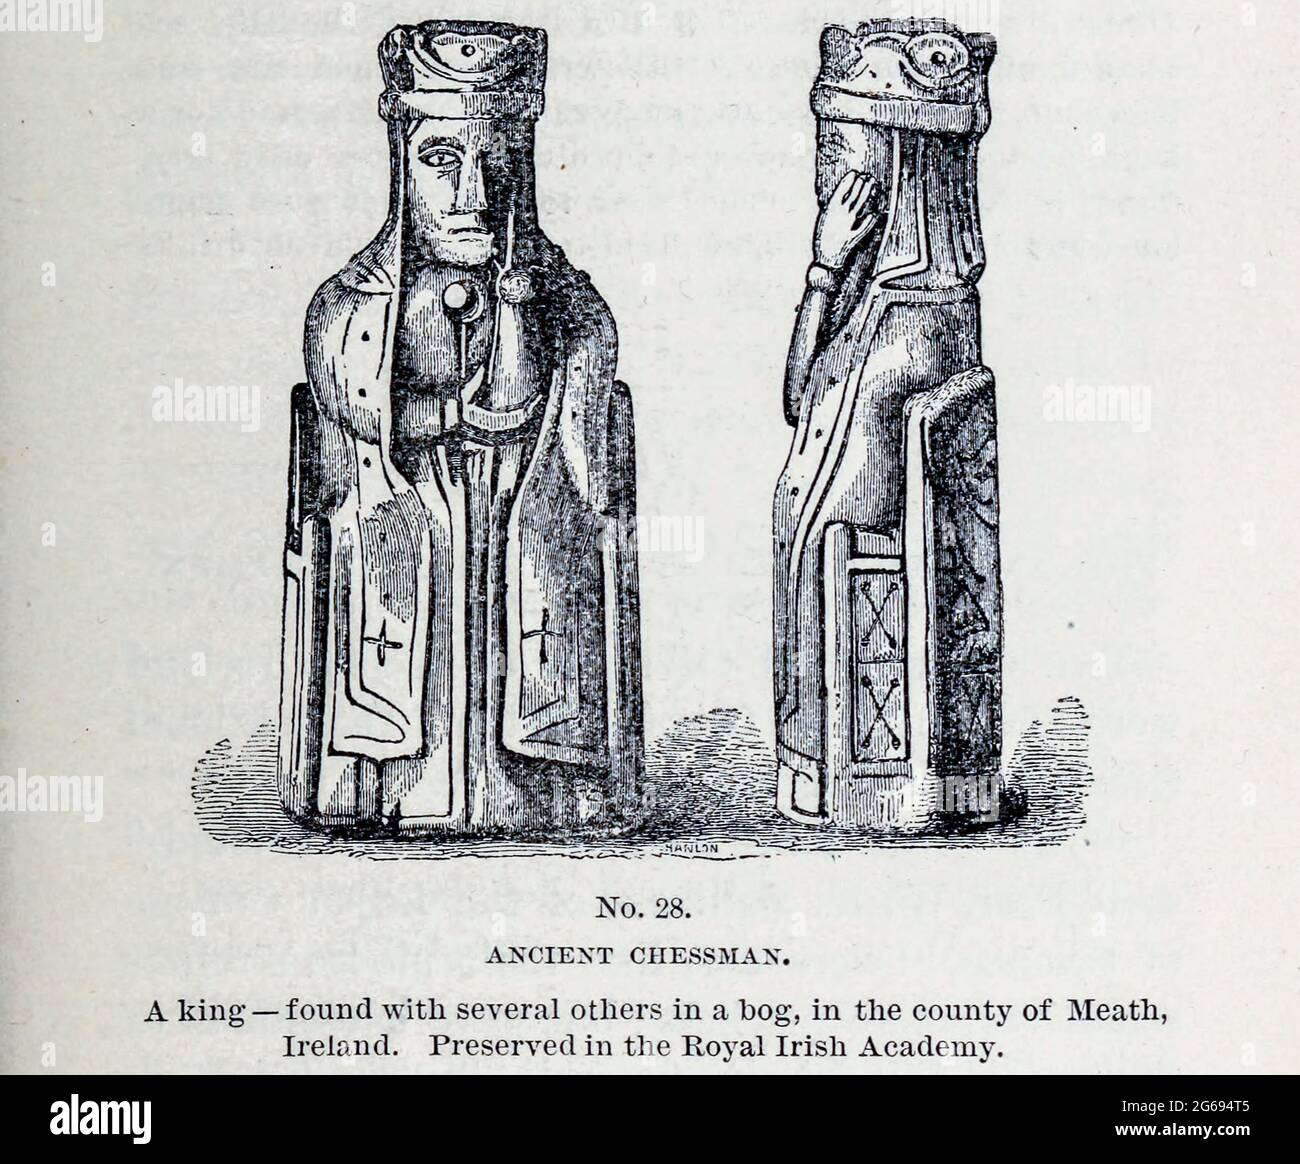 Ancient Chessman A king — found with several others in a bog, in the county of Meath, Ireland. Preserved in the Royal Irish Academy From the book  ' Athletics and manly sport ' by John Boyle O'Reilly, 1844-1890 Published in Boston, by Pilot publishing company in 1890. DEDICATED TO THOSE WHO BELIEVE THAT A LOVE FOR INNOCENT SPORT, PLAYFUL EXERCISE. AND ENJOYMENT OF NATURE, IS A BLESSING INTENDED NOT ONLY FOR THE YEARS OF BOYHOOD, BUT FOR THE WHOLE LIFE OF A MAN Stock Photo